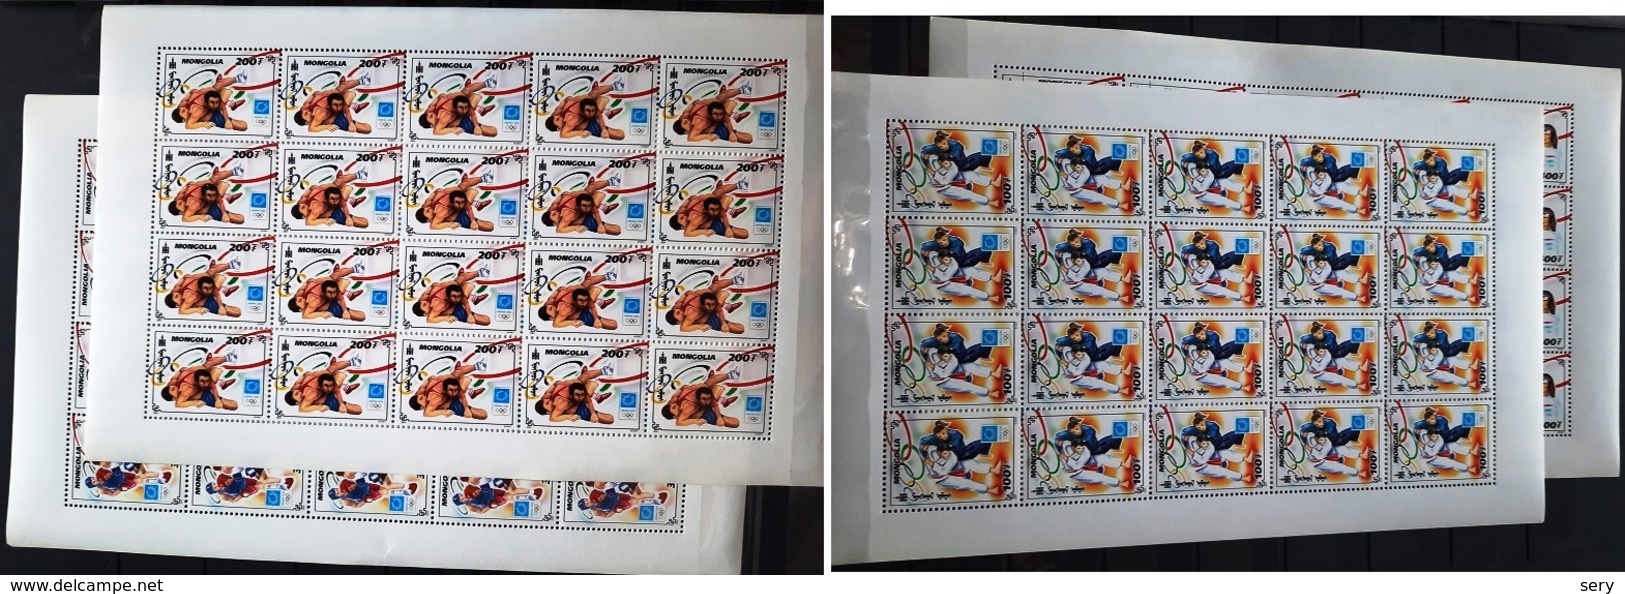 Mongolia 2004 Set 4 Sheets  MNH SCARCE 28th Summer Olympic Games Wrestling Boxing Pistol Shooting  ONON - Summer 2004: Athens - Paralympic